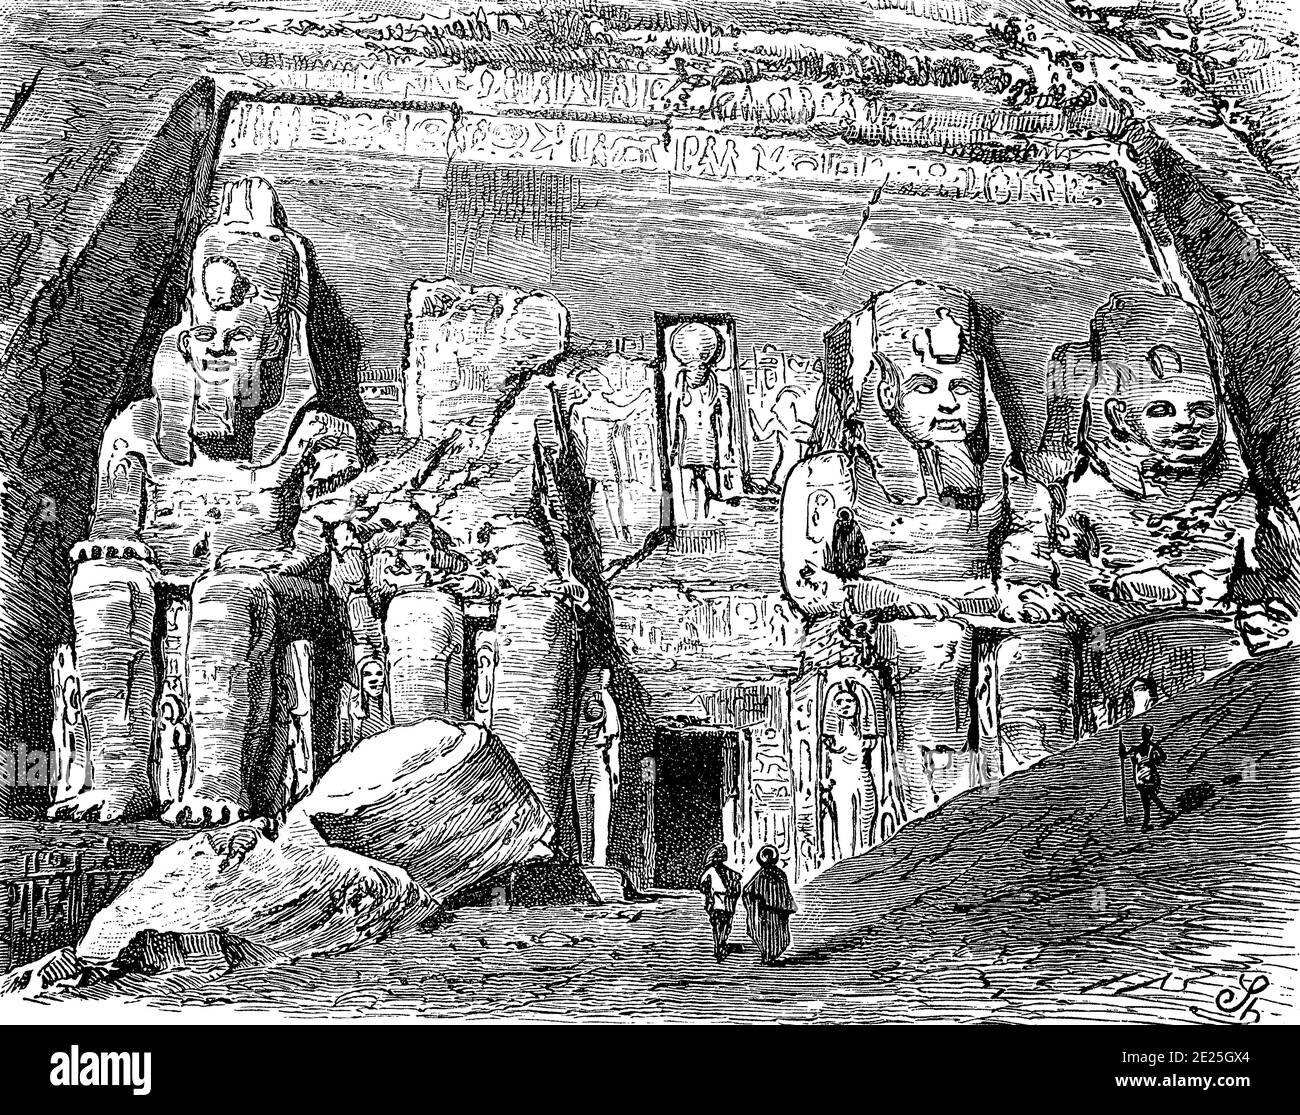 Entrance to the rock temple of Abu Simbel in Egypt, in 1870  /  Eingang zum Felsentempel von Abu Simbel in Ägypten, im Jahre 1870, Historisch, historical, digital improved reproduction of an original from the 19th century / digitale Reproduktion einer Originalvorlage aus dem 19. Jahrhundert, Stock Photo